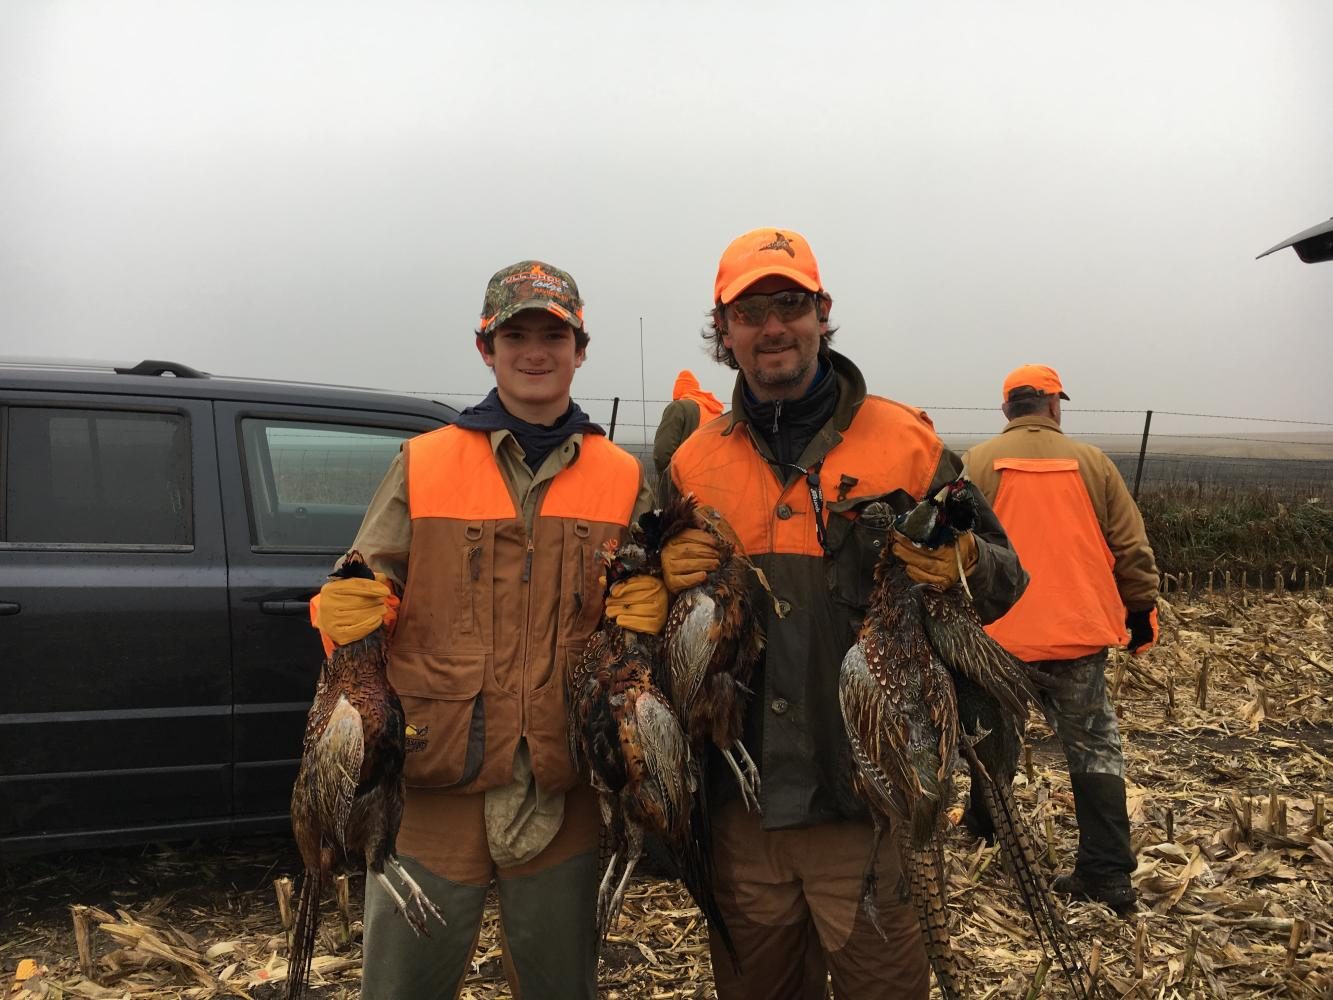 Appert and his dad show off the birds they caught after a day of hunting.  Ive learned so much about my dad and grandpa through hunting, and I wouldnt have found out most of the things if we werent spending time together. Theyve taught me a lot about myself too, Appert said.